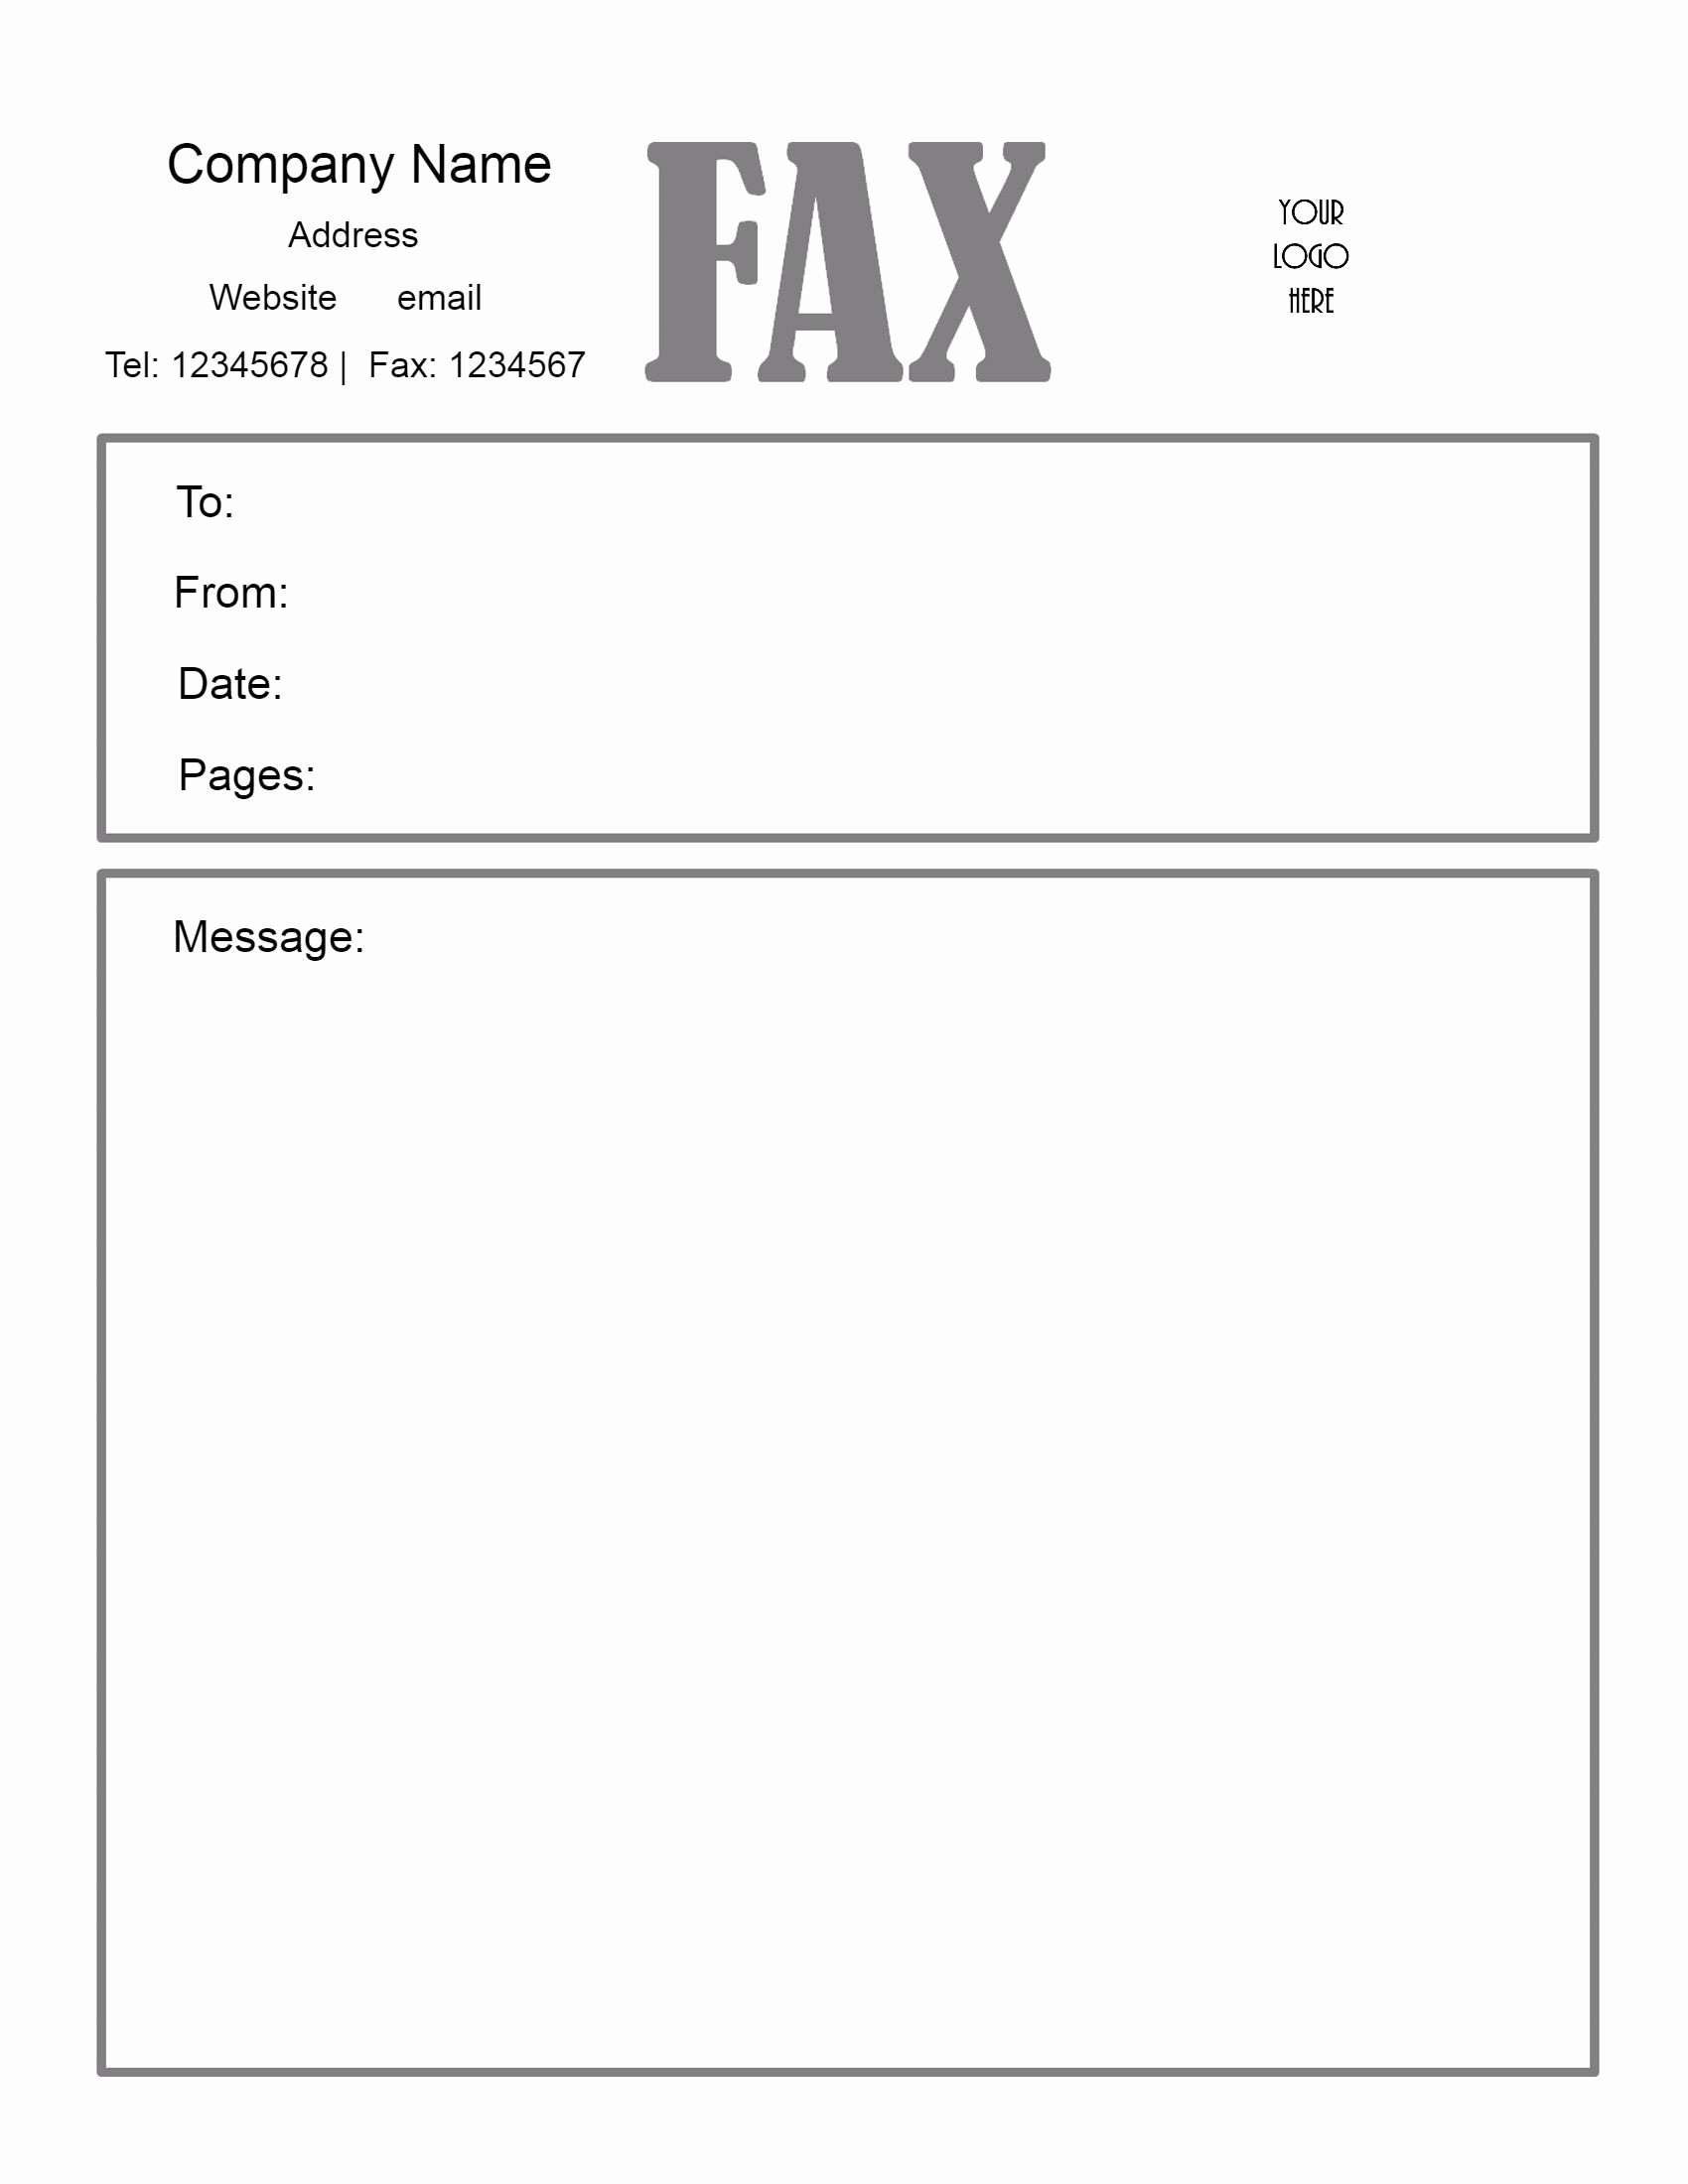 Printable Basic Fax Cover Sheet Lovely Fax Cover Sheet – Download Fax Cover Sheet Fax Cover